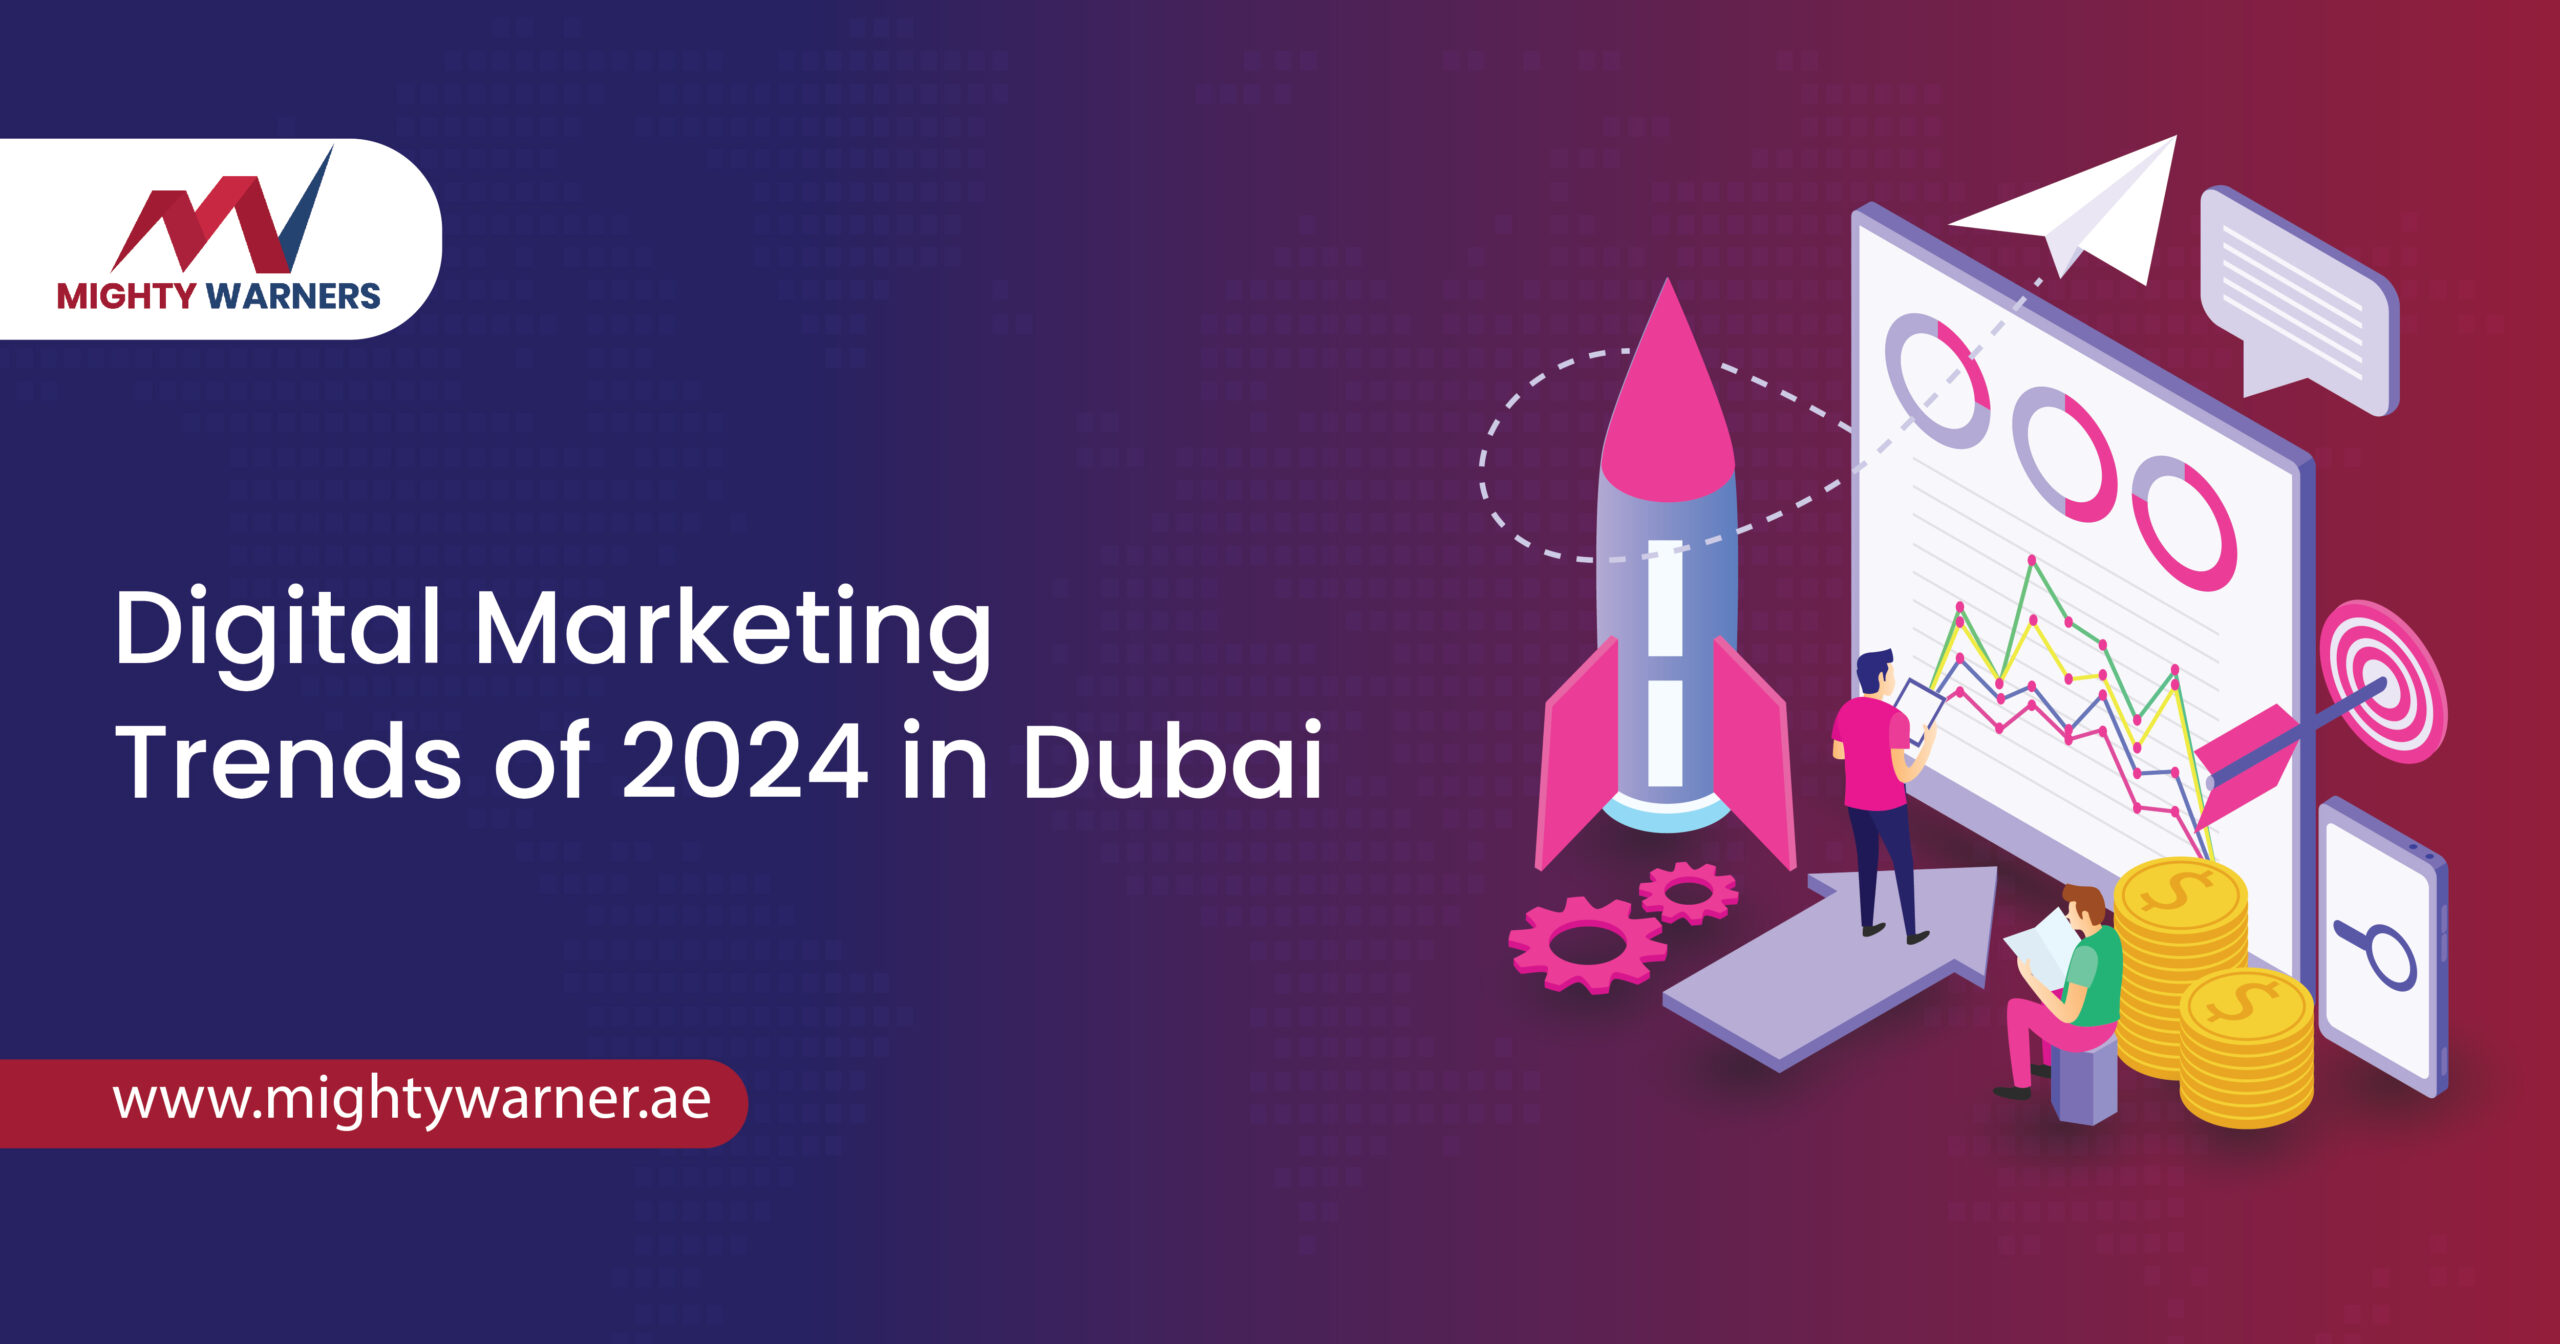 The Future is Now: Digital Marketing Trends of 2024